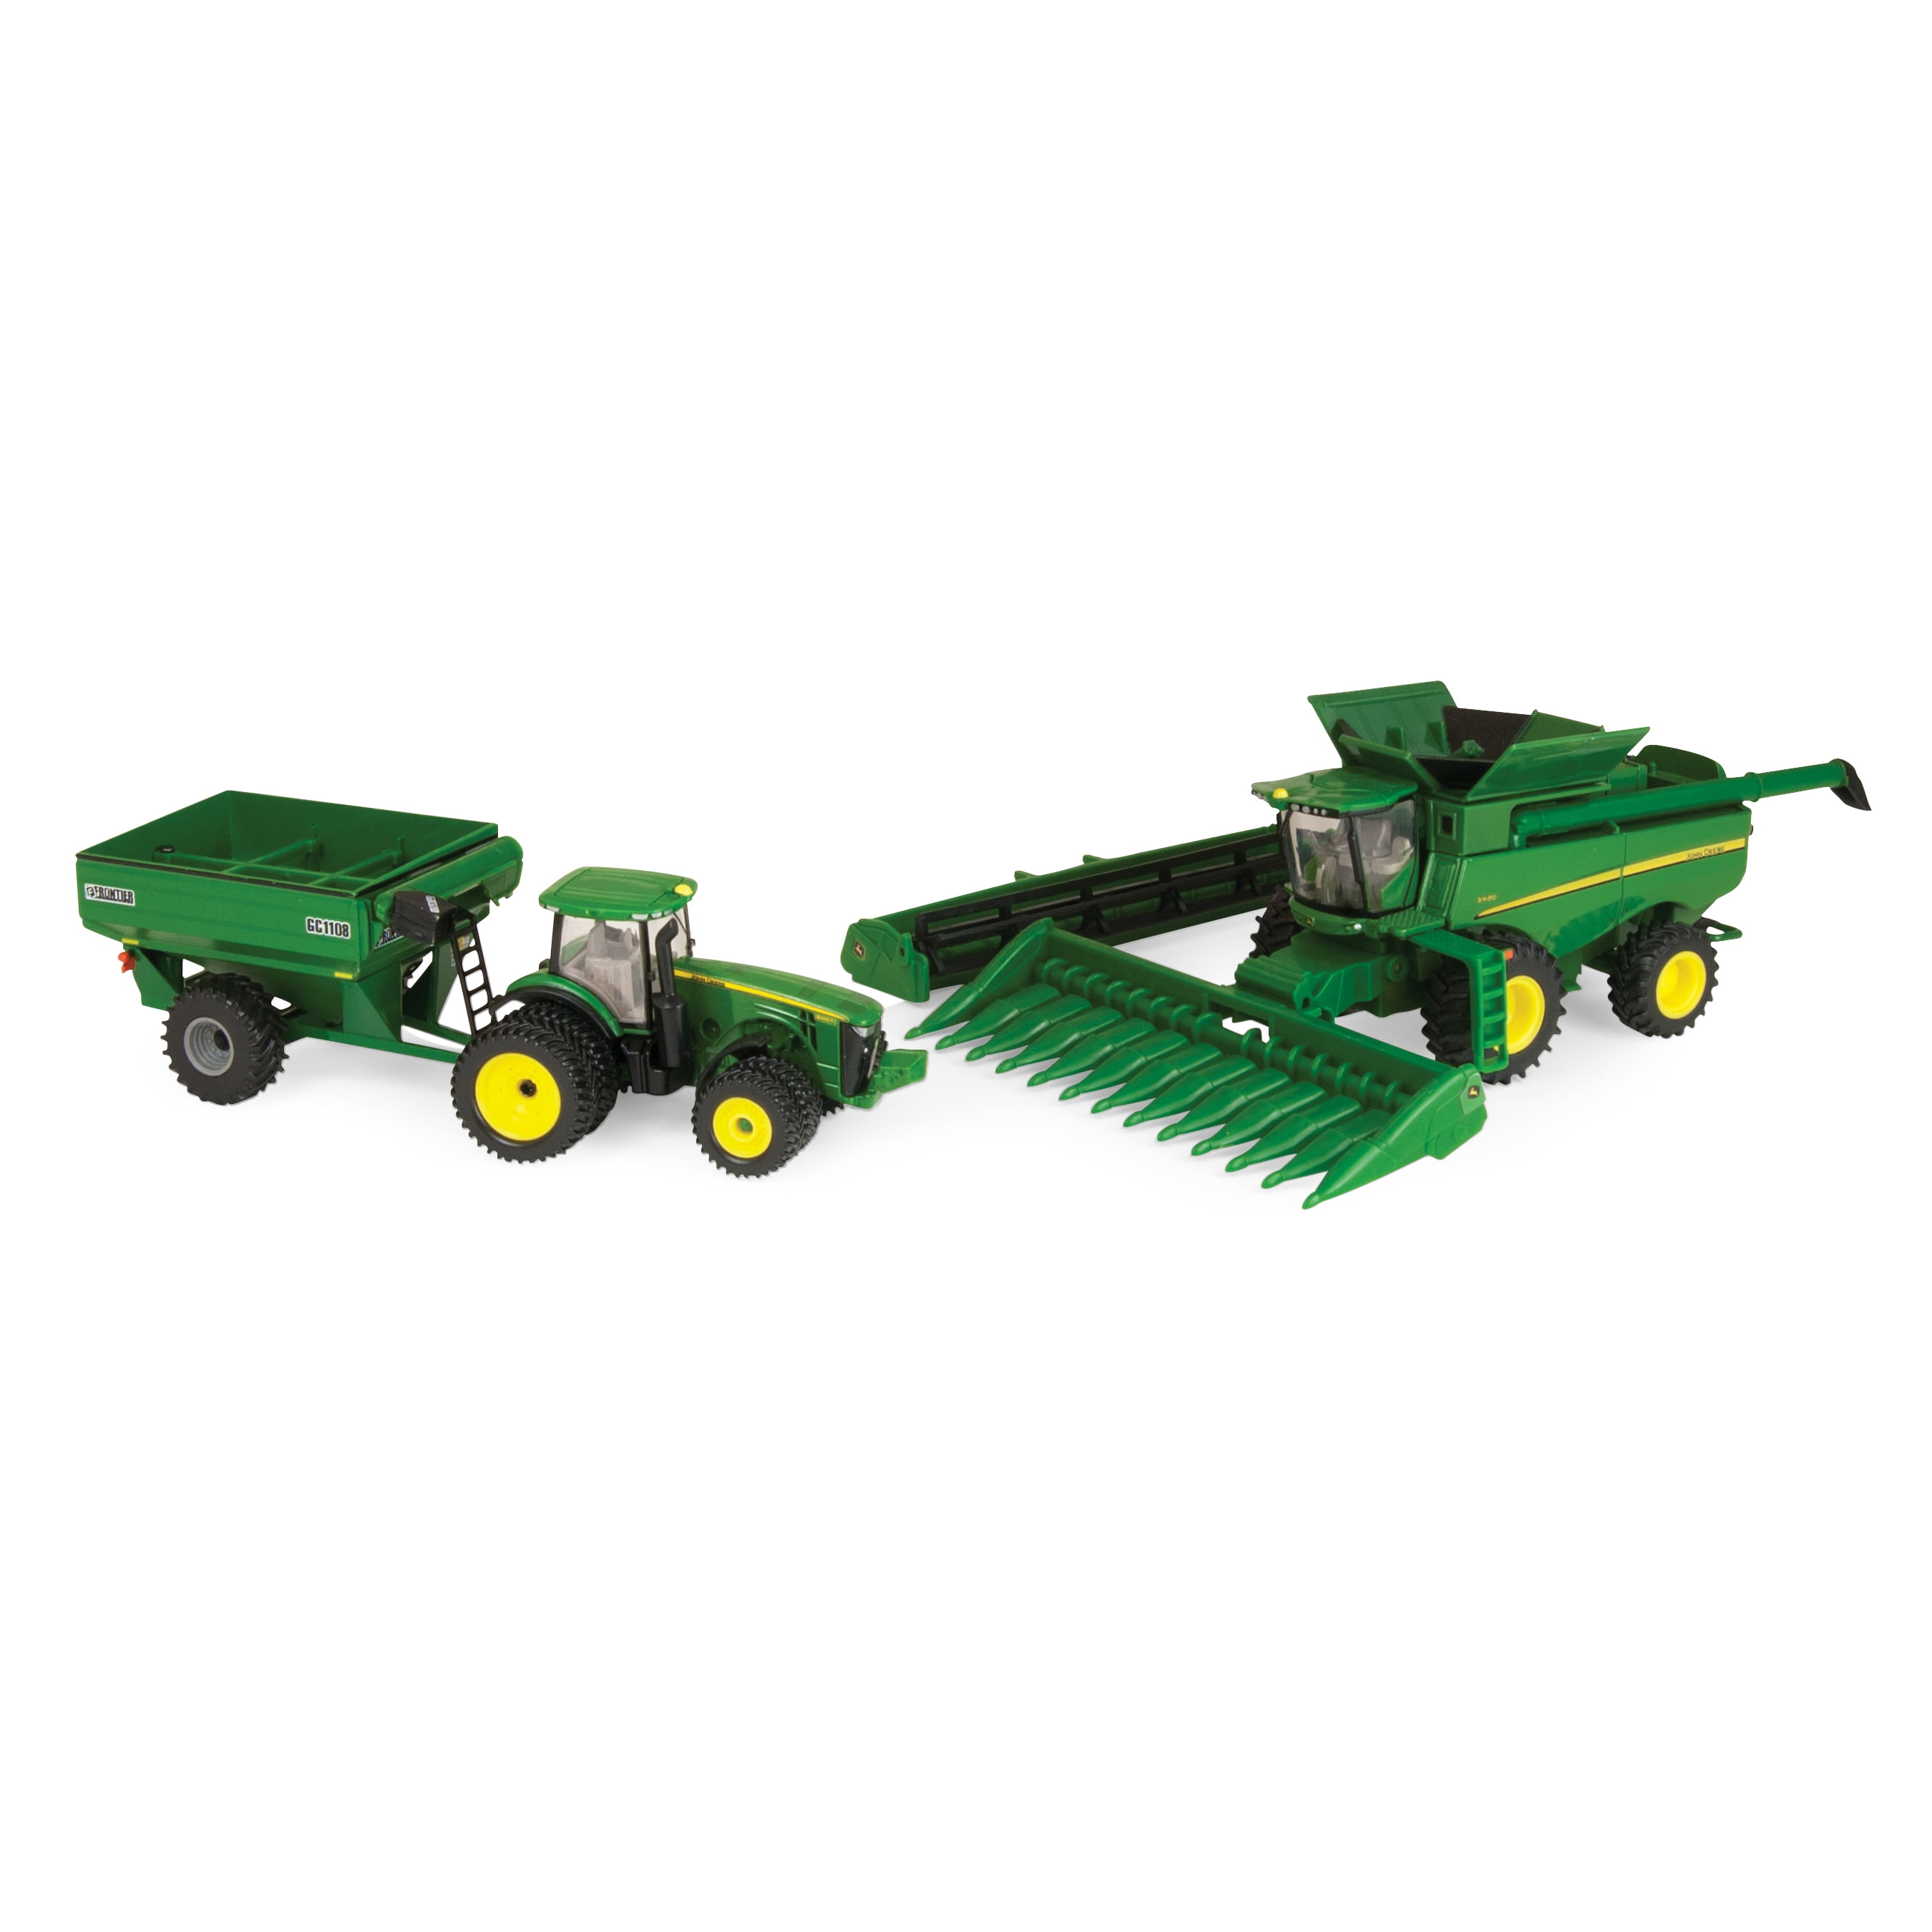 Agriculture Layout Rual 1/64 Scale Farm Toy John Deere Tractor & Trailer Set 